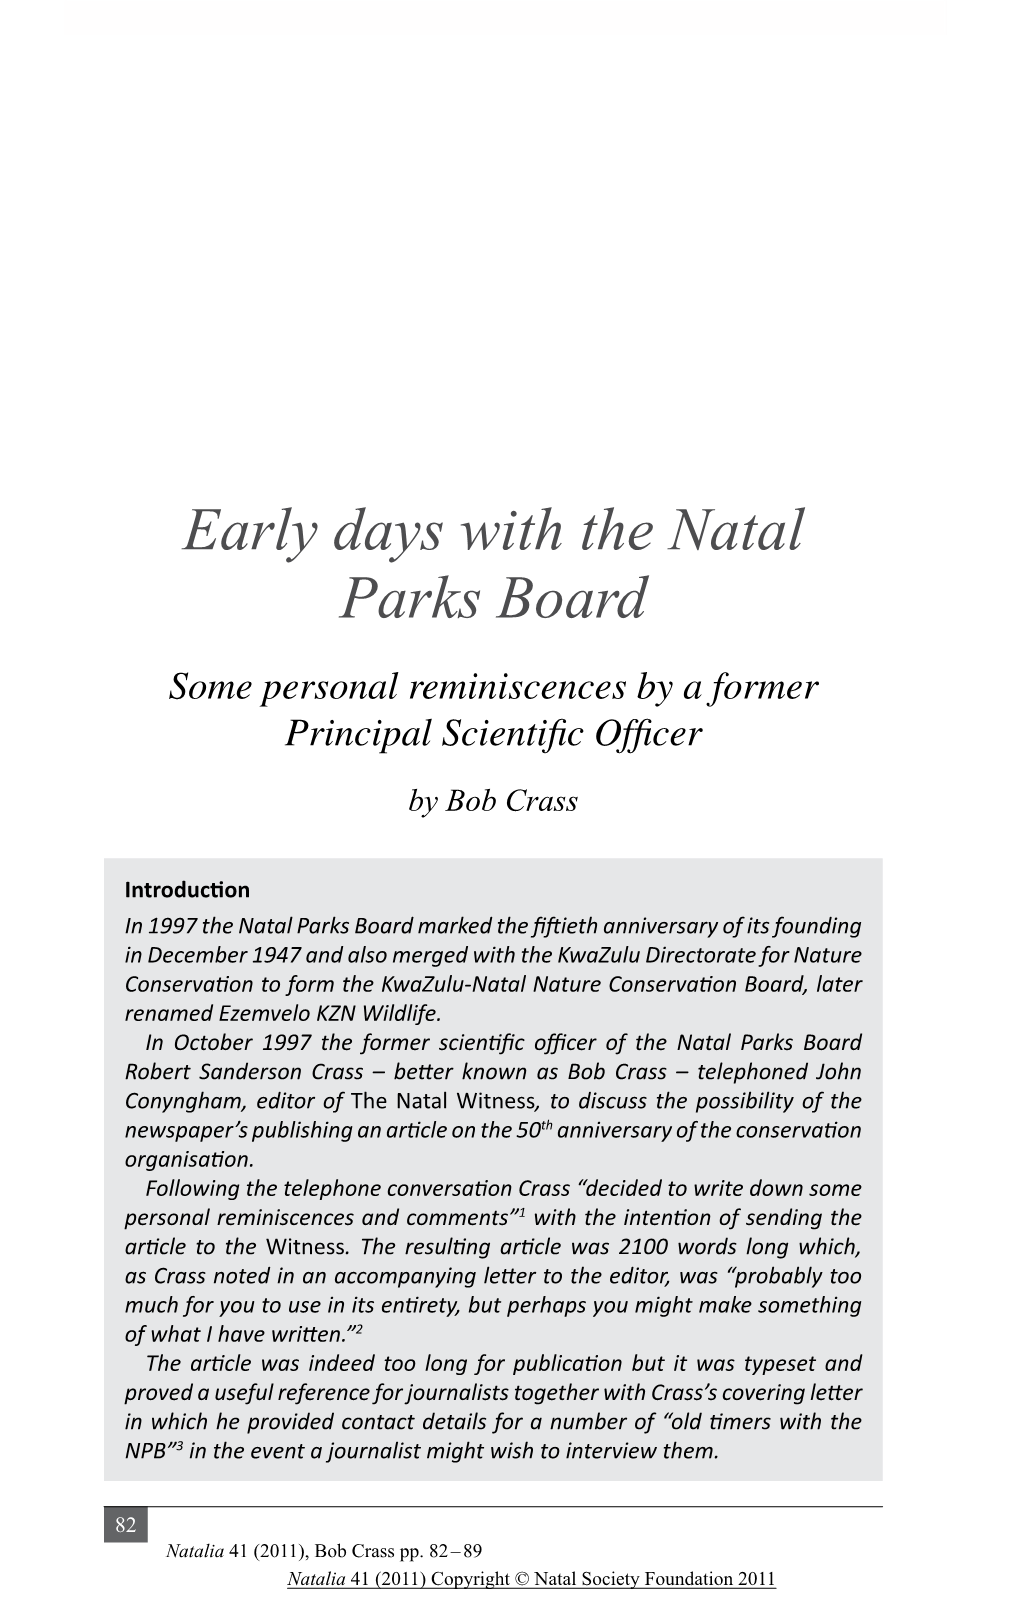 Early Days with the Natal Parks Board Some Personal Reminiscences by a Former Principal Scientific Officer